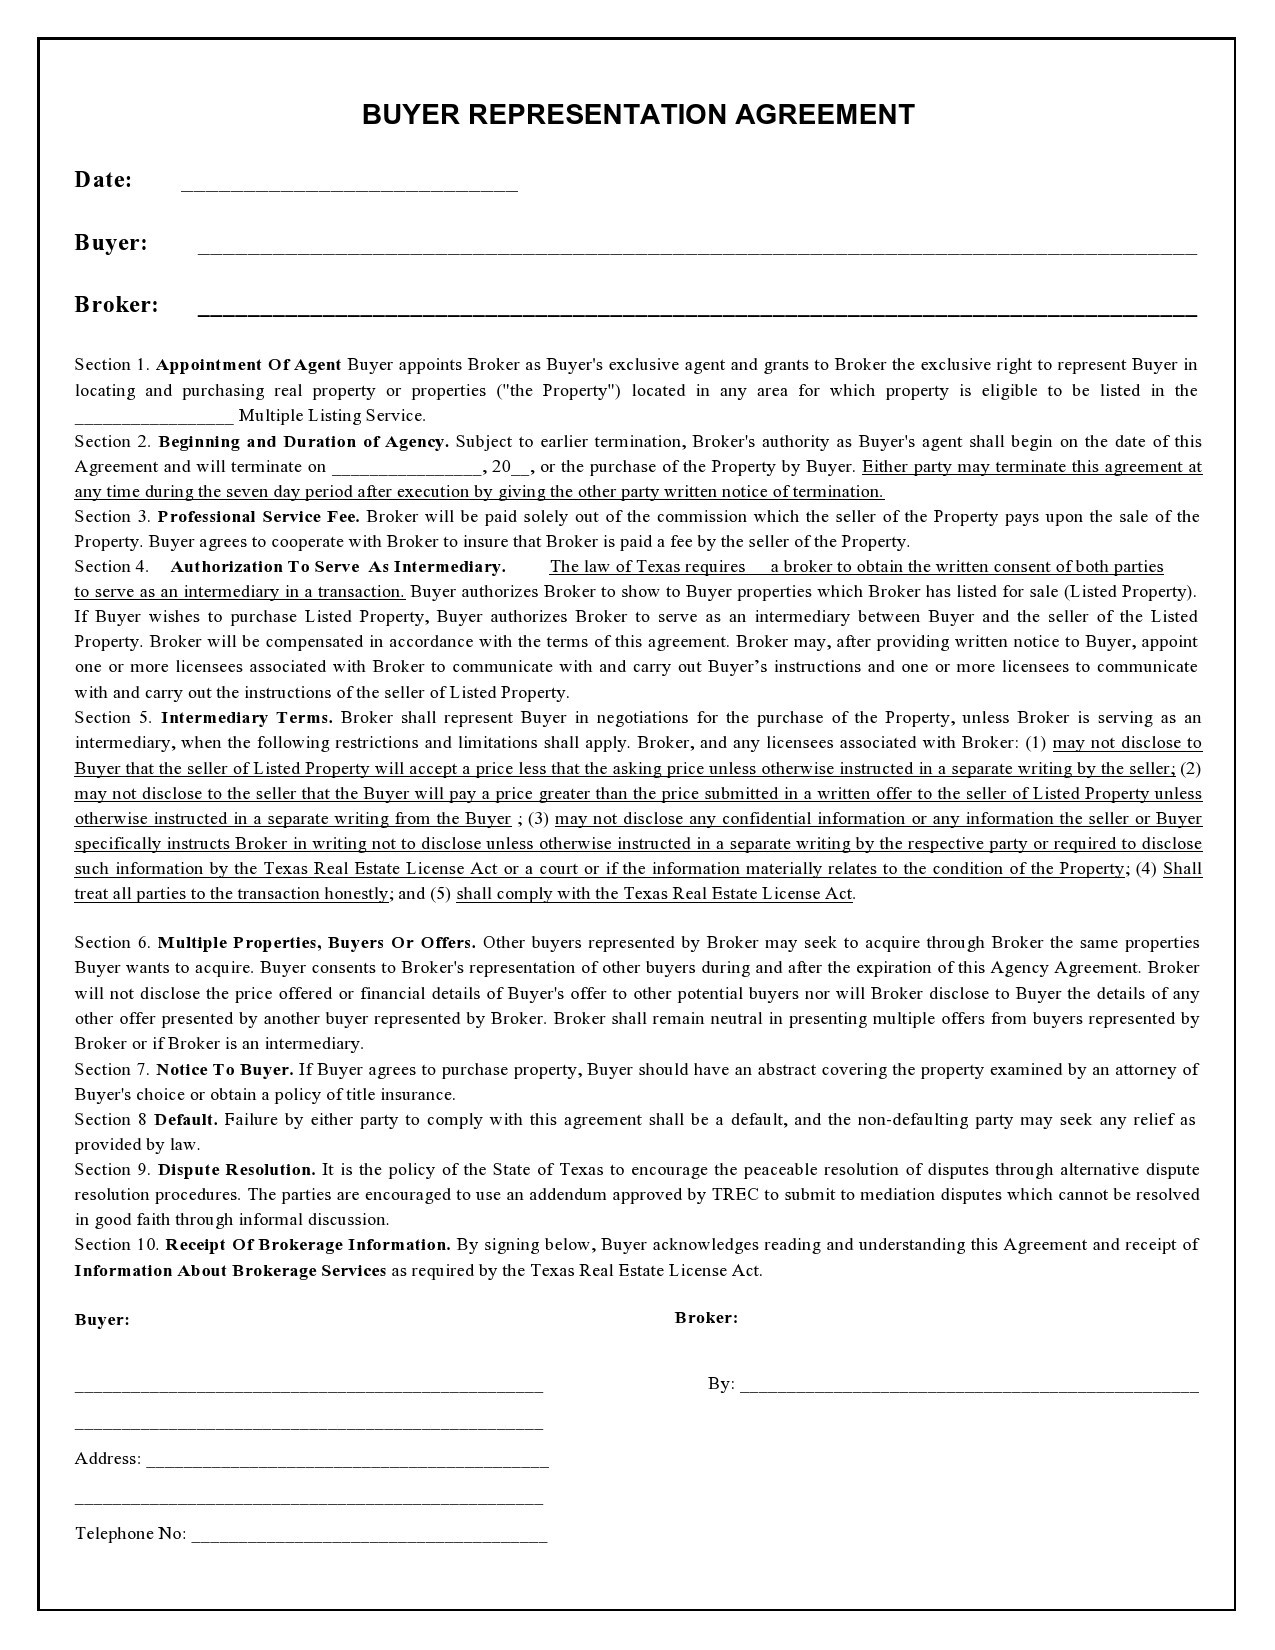 Free buyer agency agreement 07